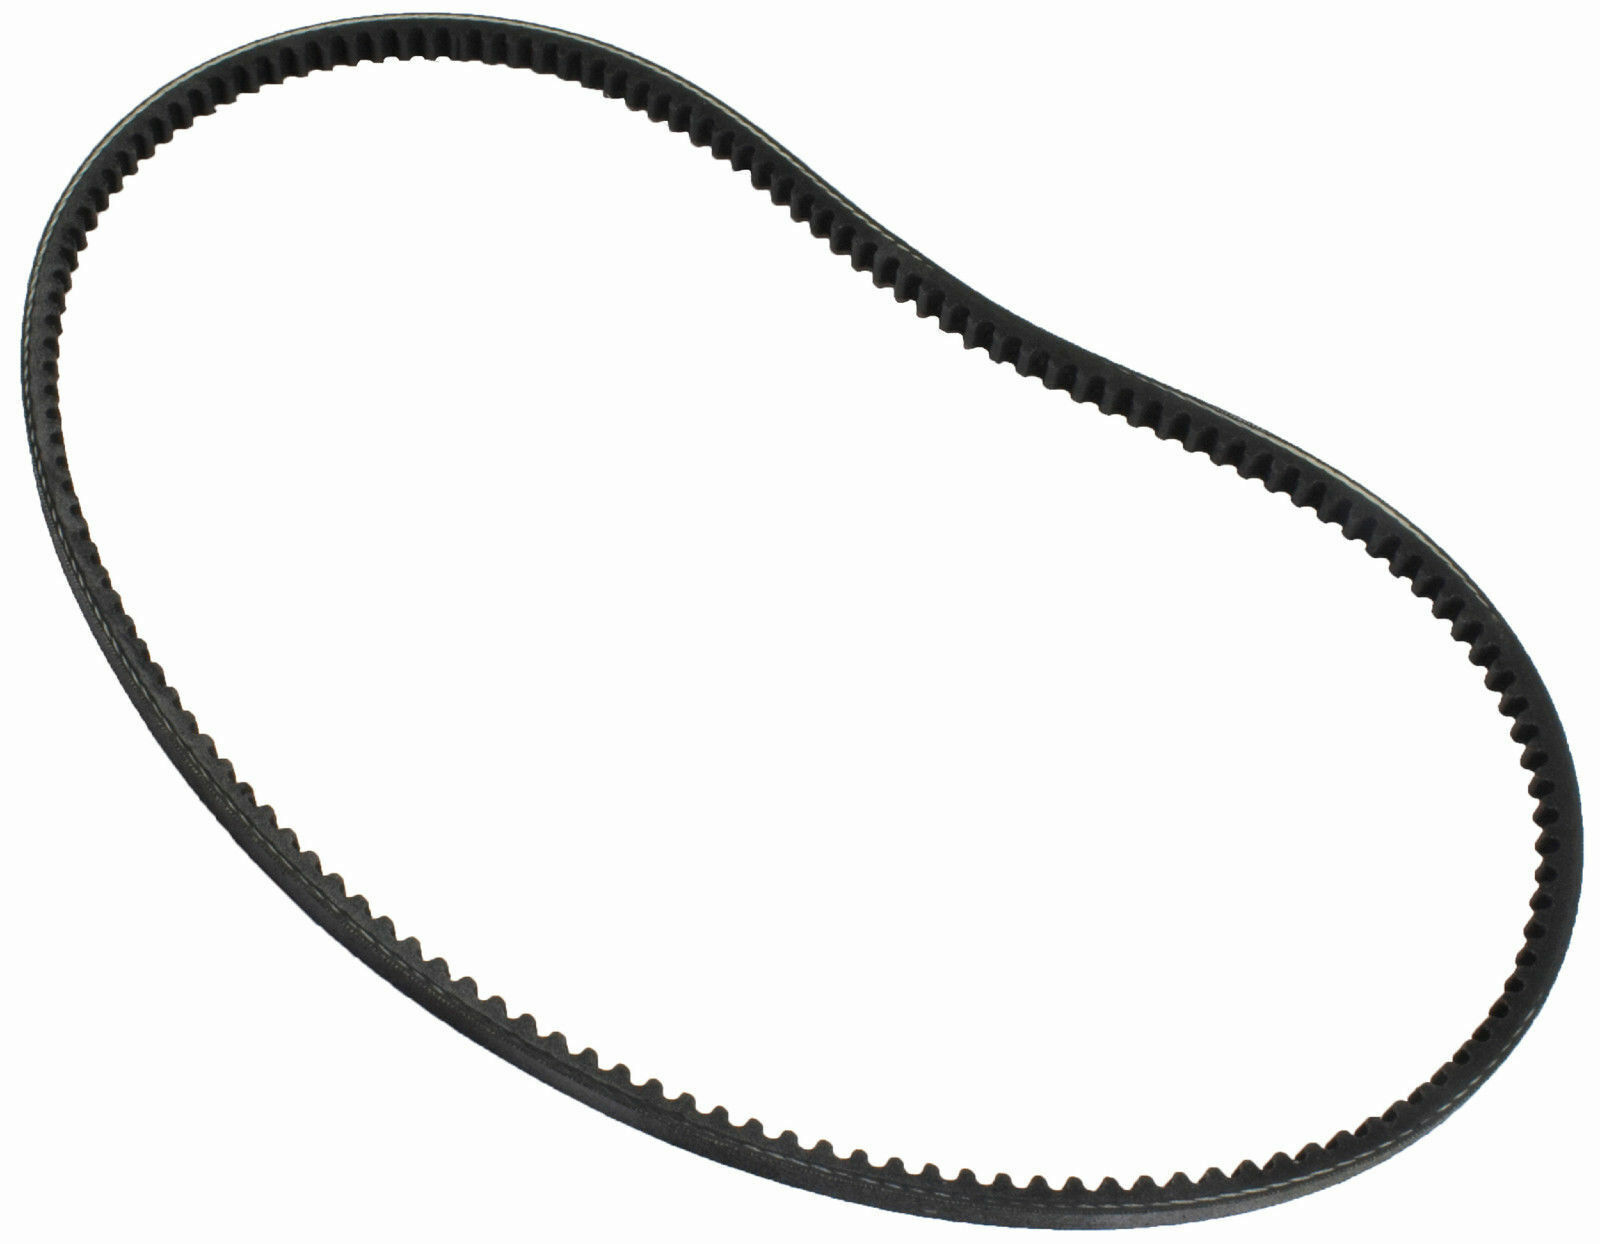 Qualcast / Suffolk Punch / Atco Toothed Drive Belt for Petrol Cylinder Mowers  F016A57940  /  F016A58728